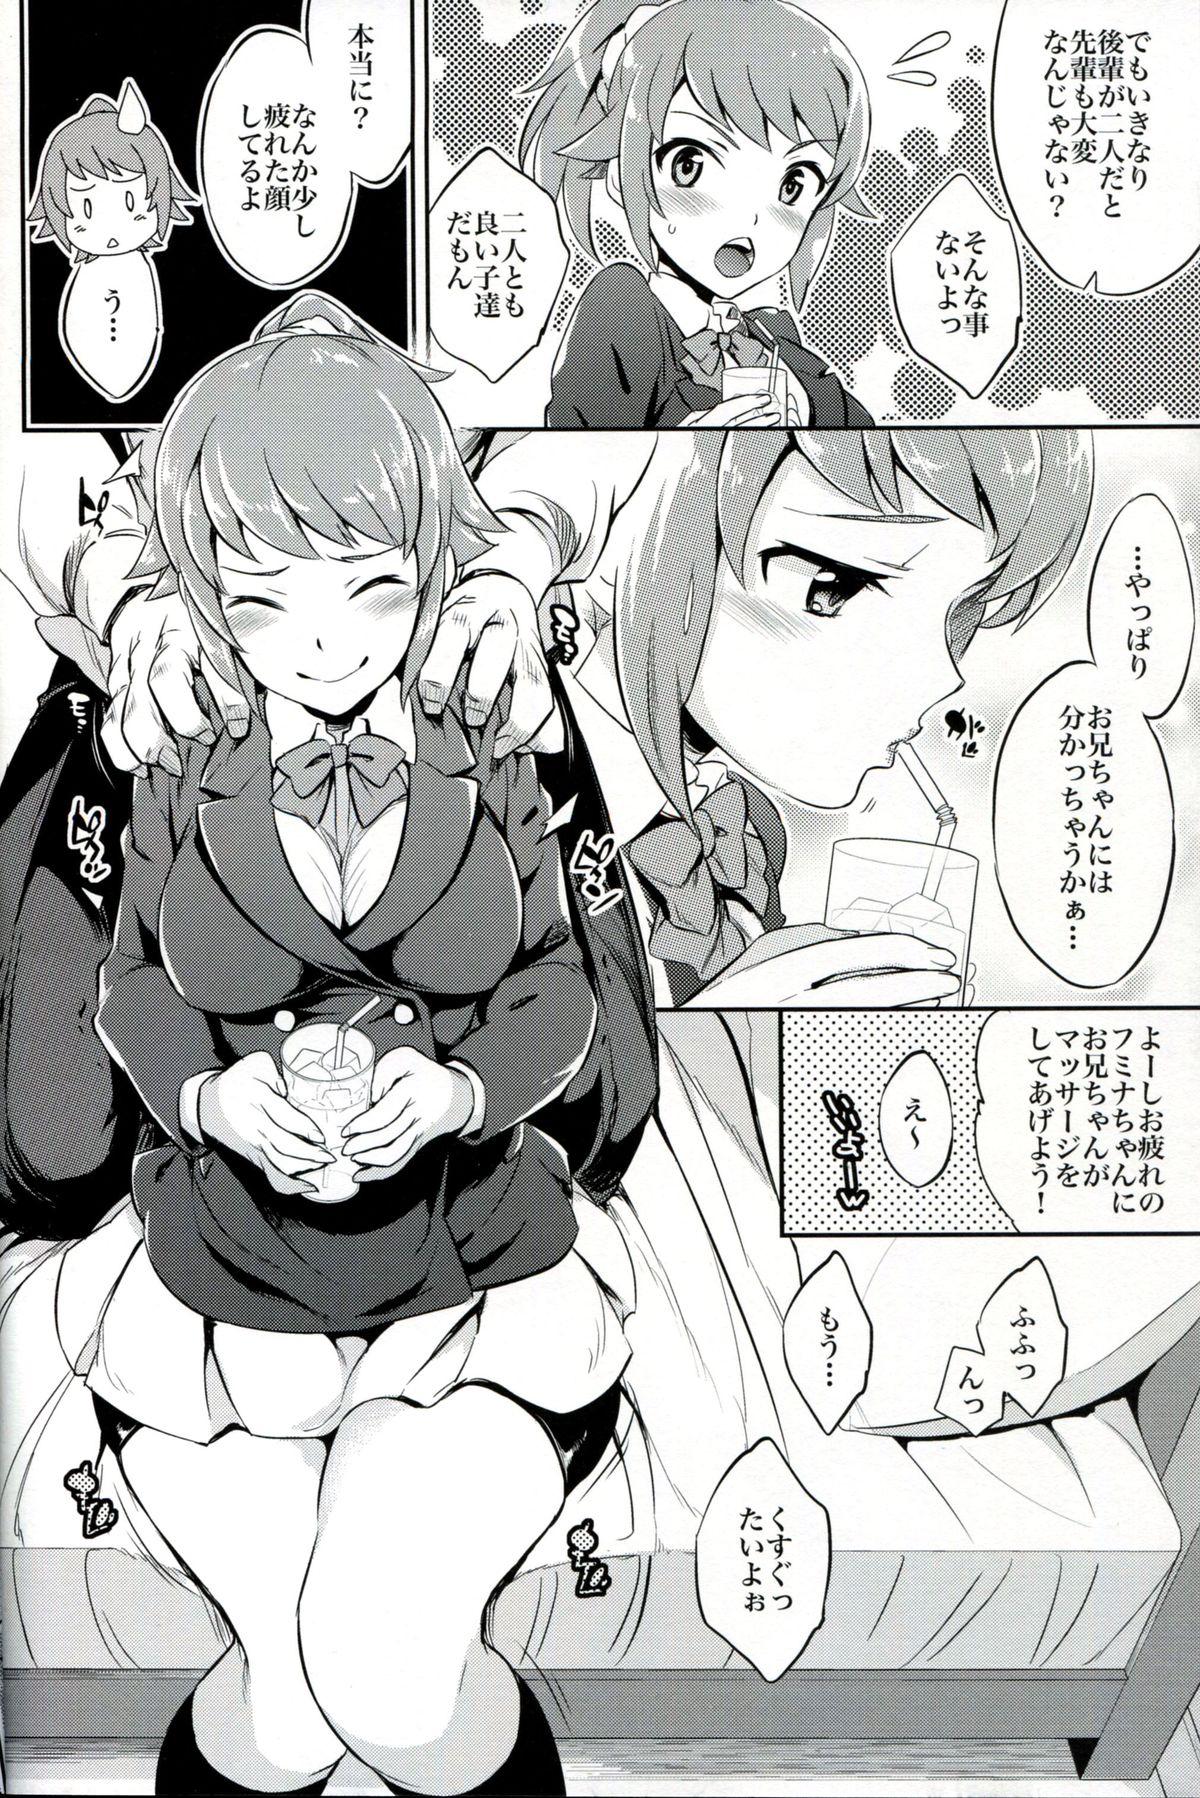 Tease (C87) [Crazy9 (Ichitaka)] C9-15 Fumina-senpai to Mob Onii-chan (Gundam Build Fighters Try) - Gundam build fighters try Rubbing - Page 5